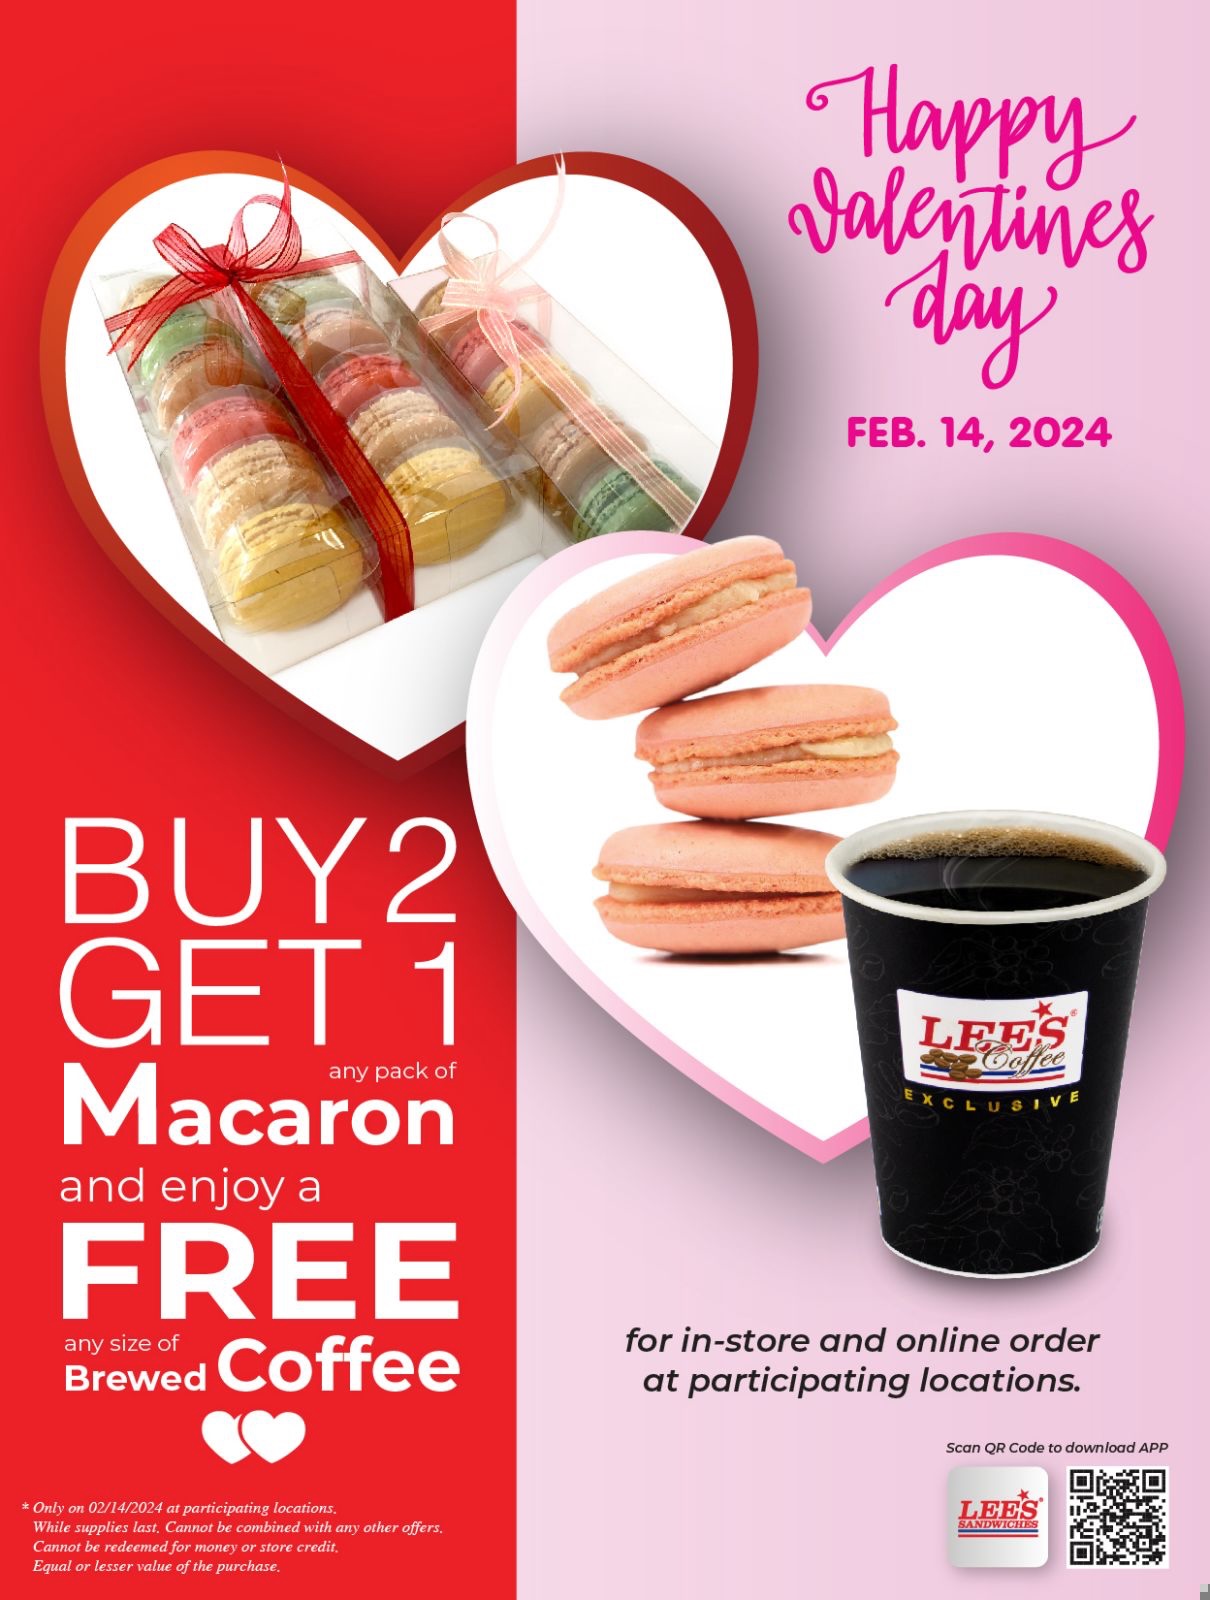 Enjoy your Valentine with our B2G1 any pack of Macaron & a Free Brewed Coffee at participating locations